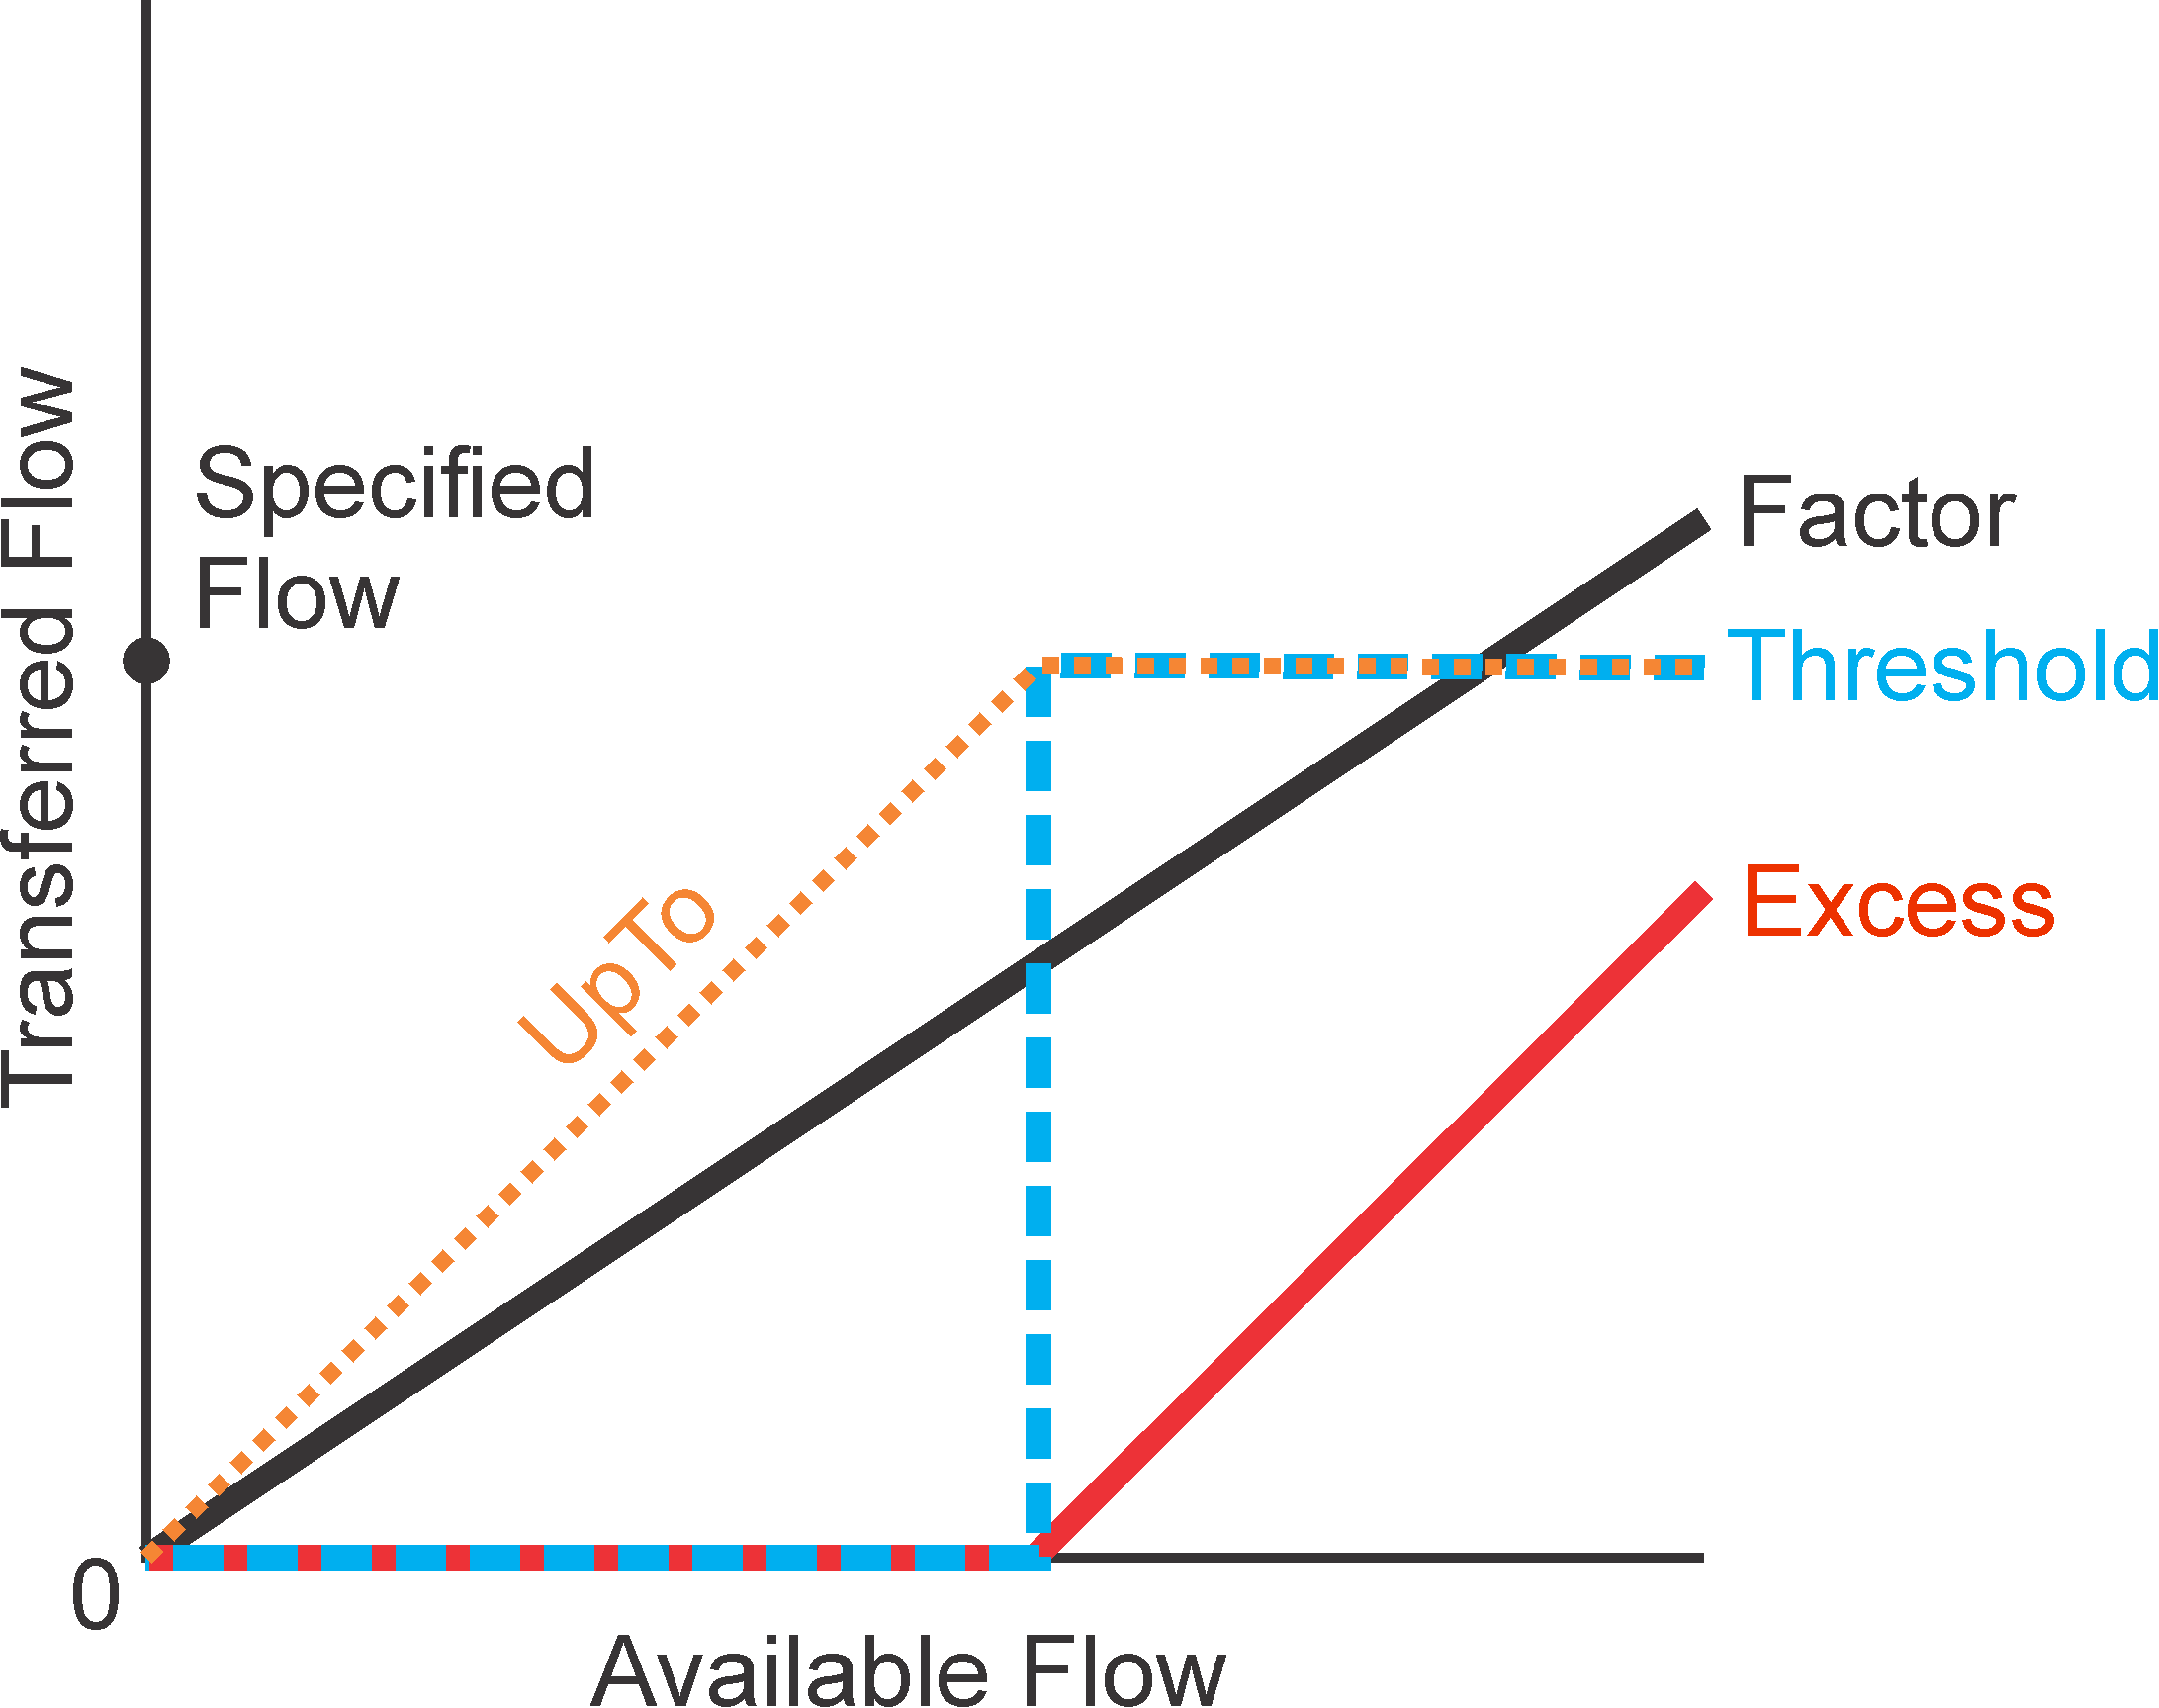 Illustration of the effect of Priority (cprior) on flow in SFR package